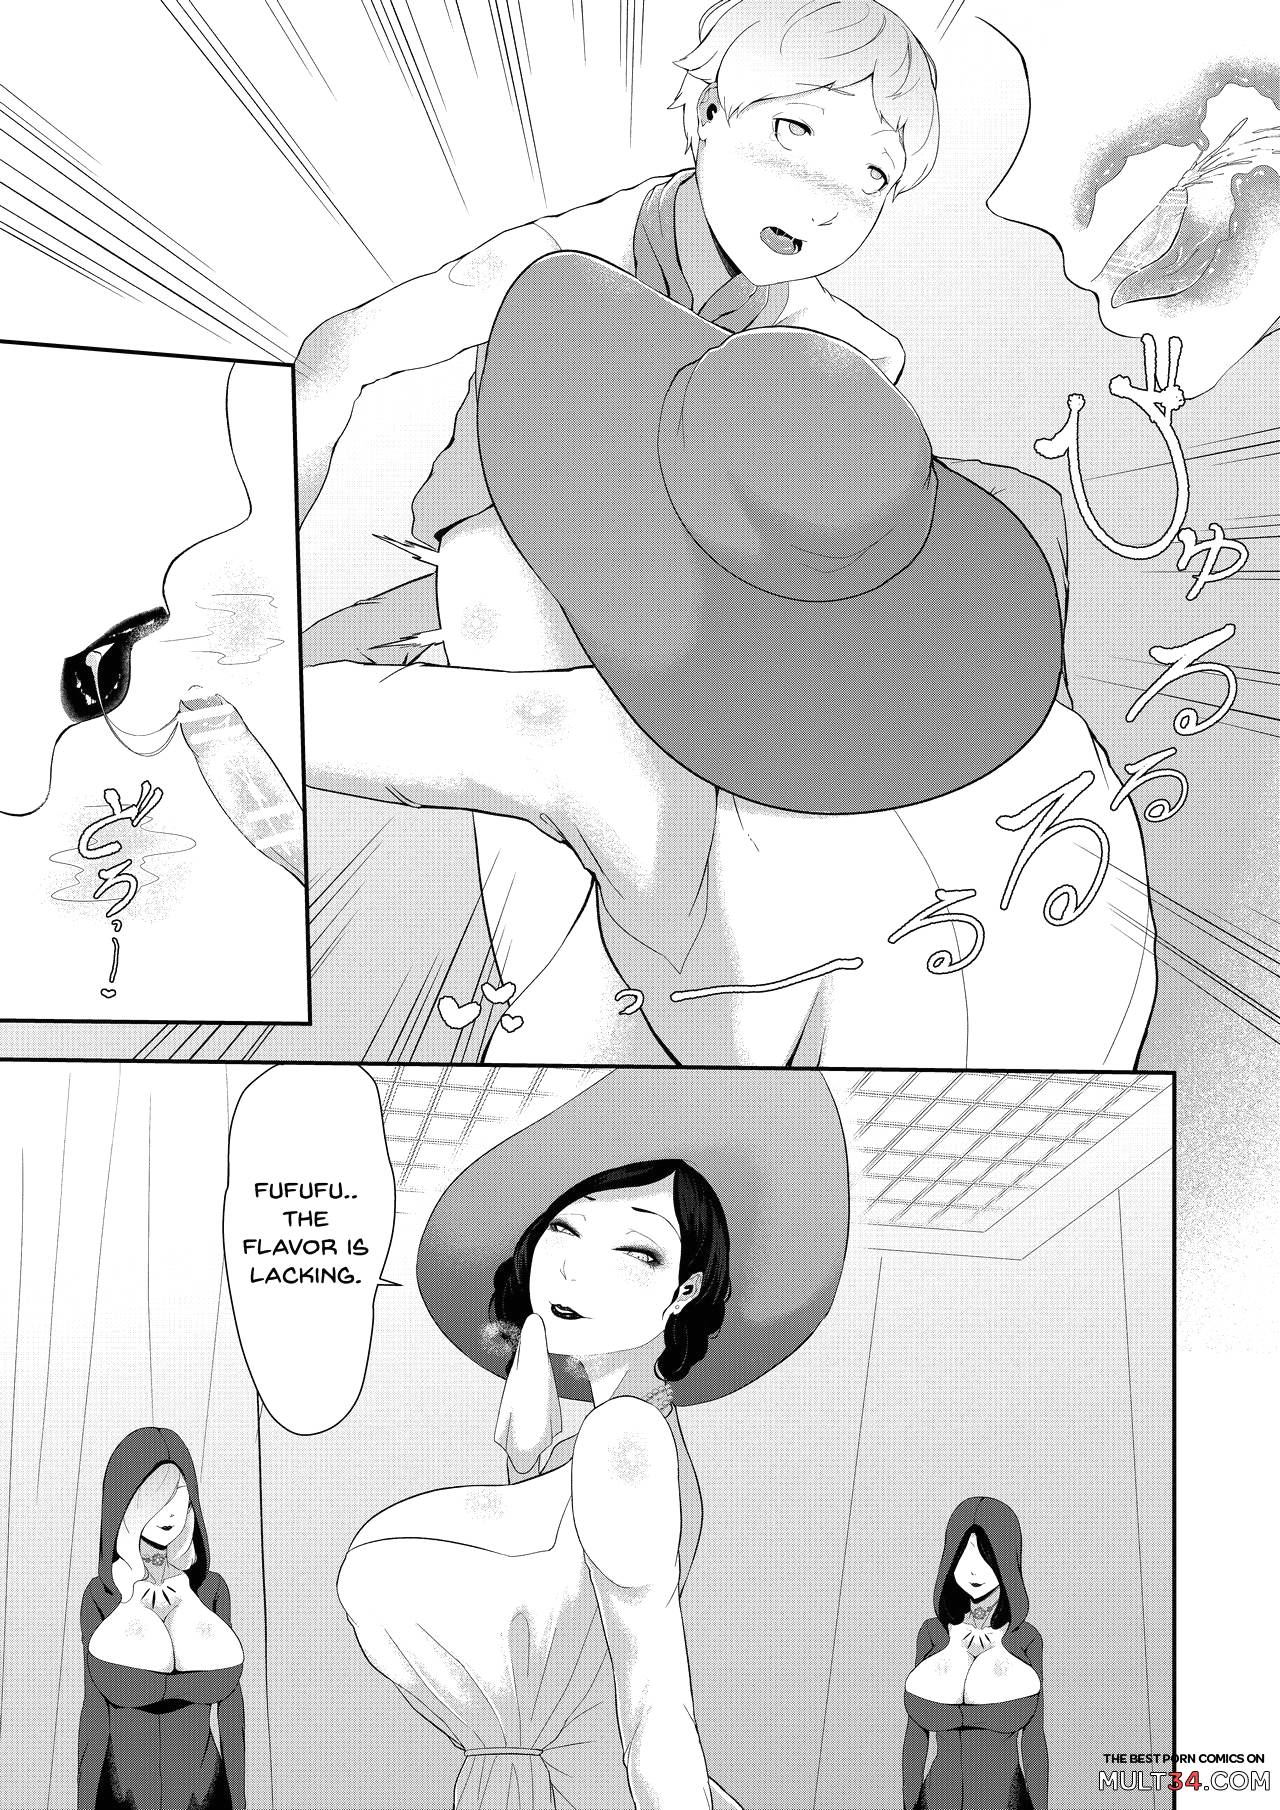 Dimitrescu-sama's Squeezing Out Your Sperm page 6